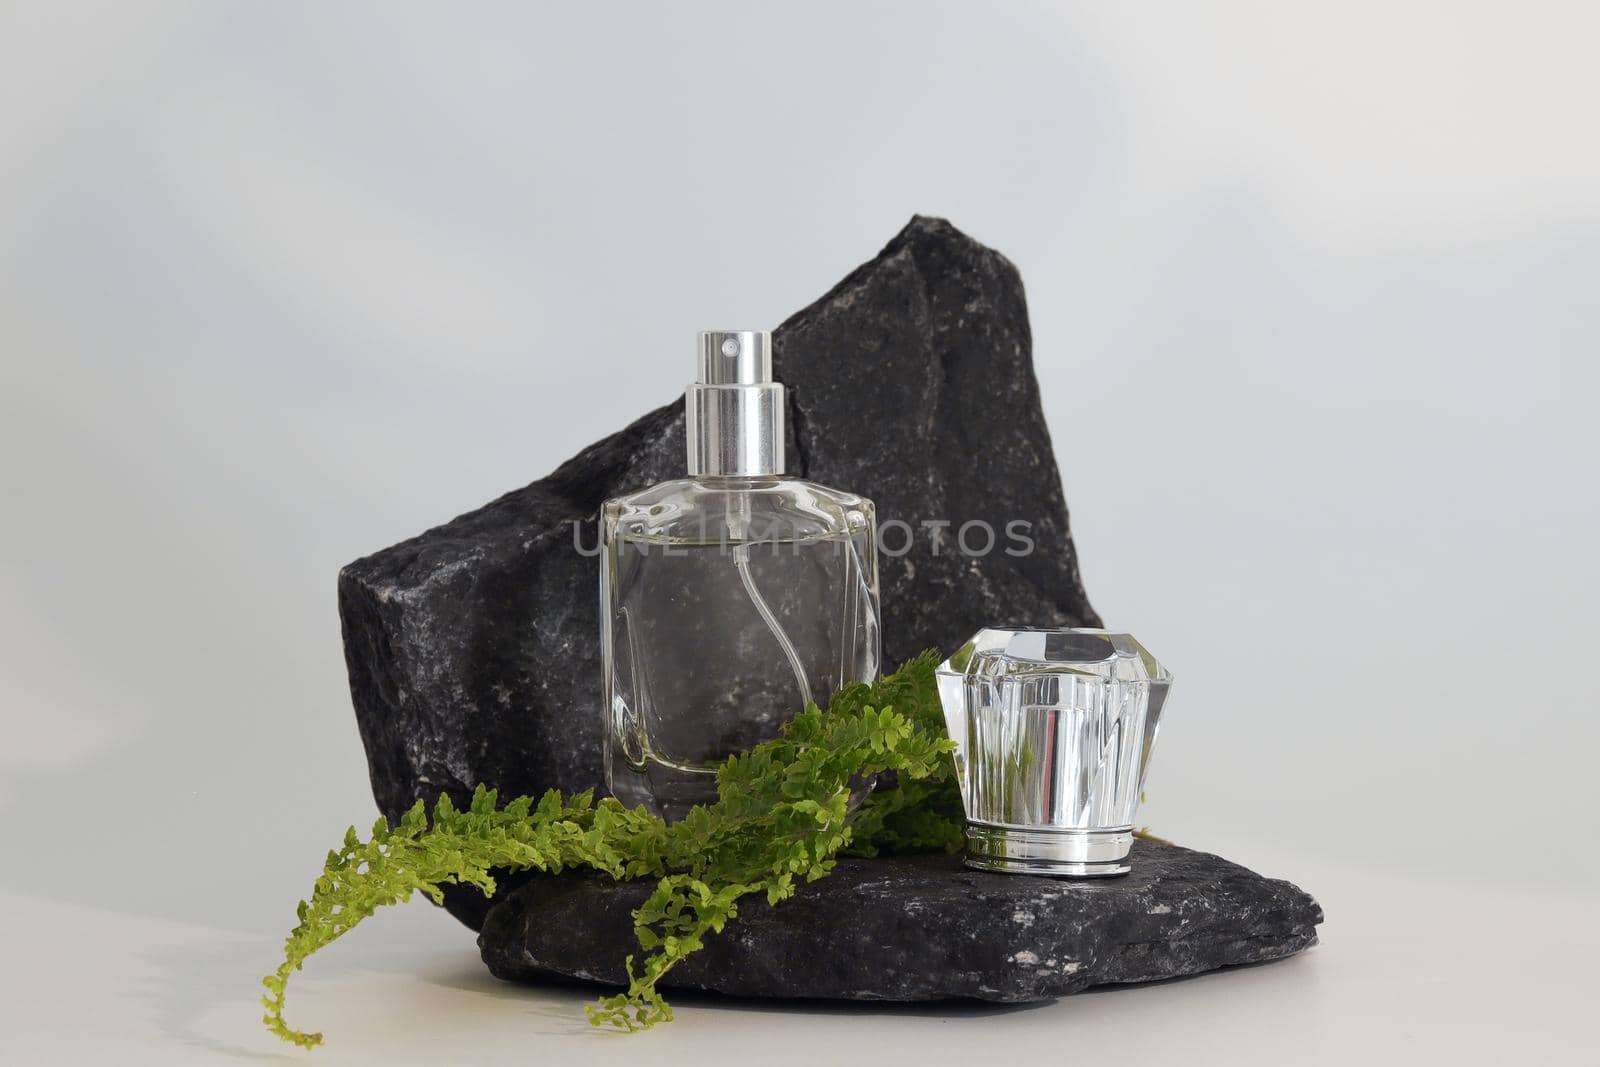 Unbranded perfume bottle standing on stone podium with plants. Perfume presentation on the white background. Mockup. Trending concept in natural materials. Women's and men's essence. Natural cosmetic